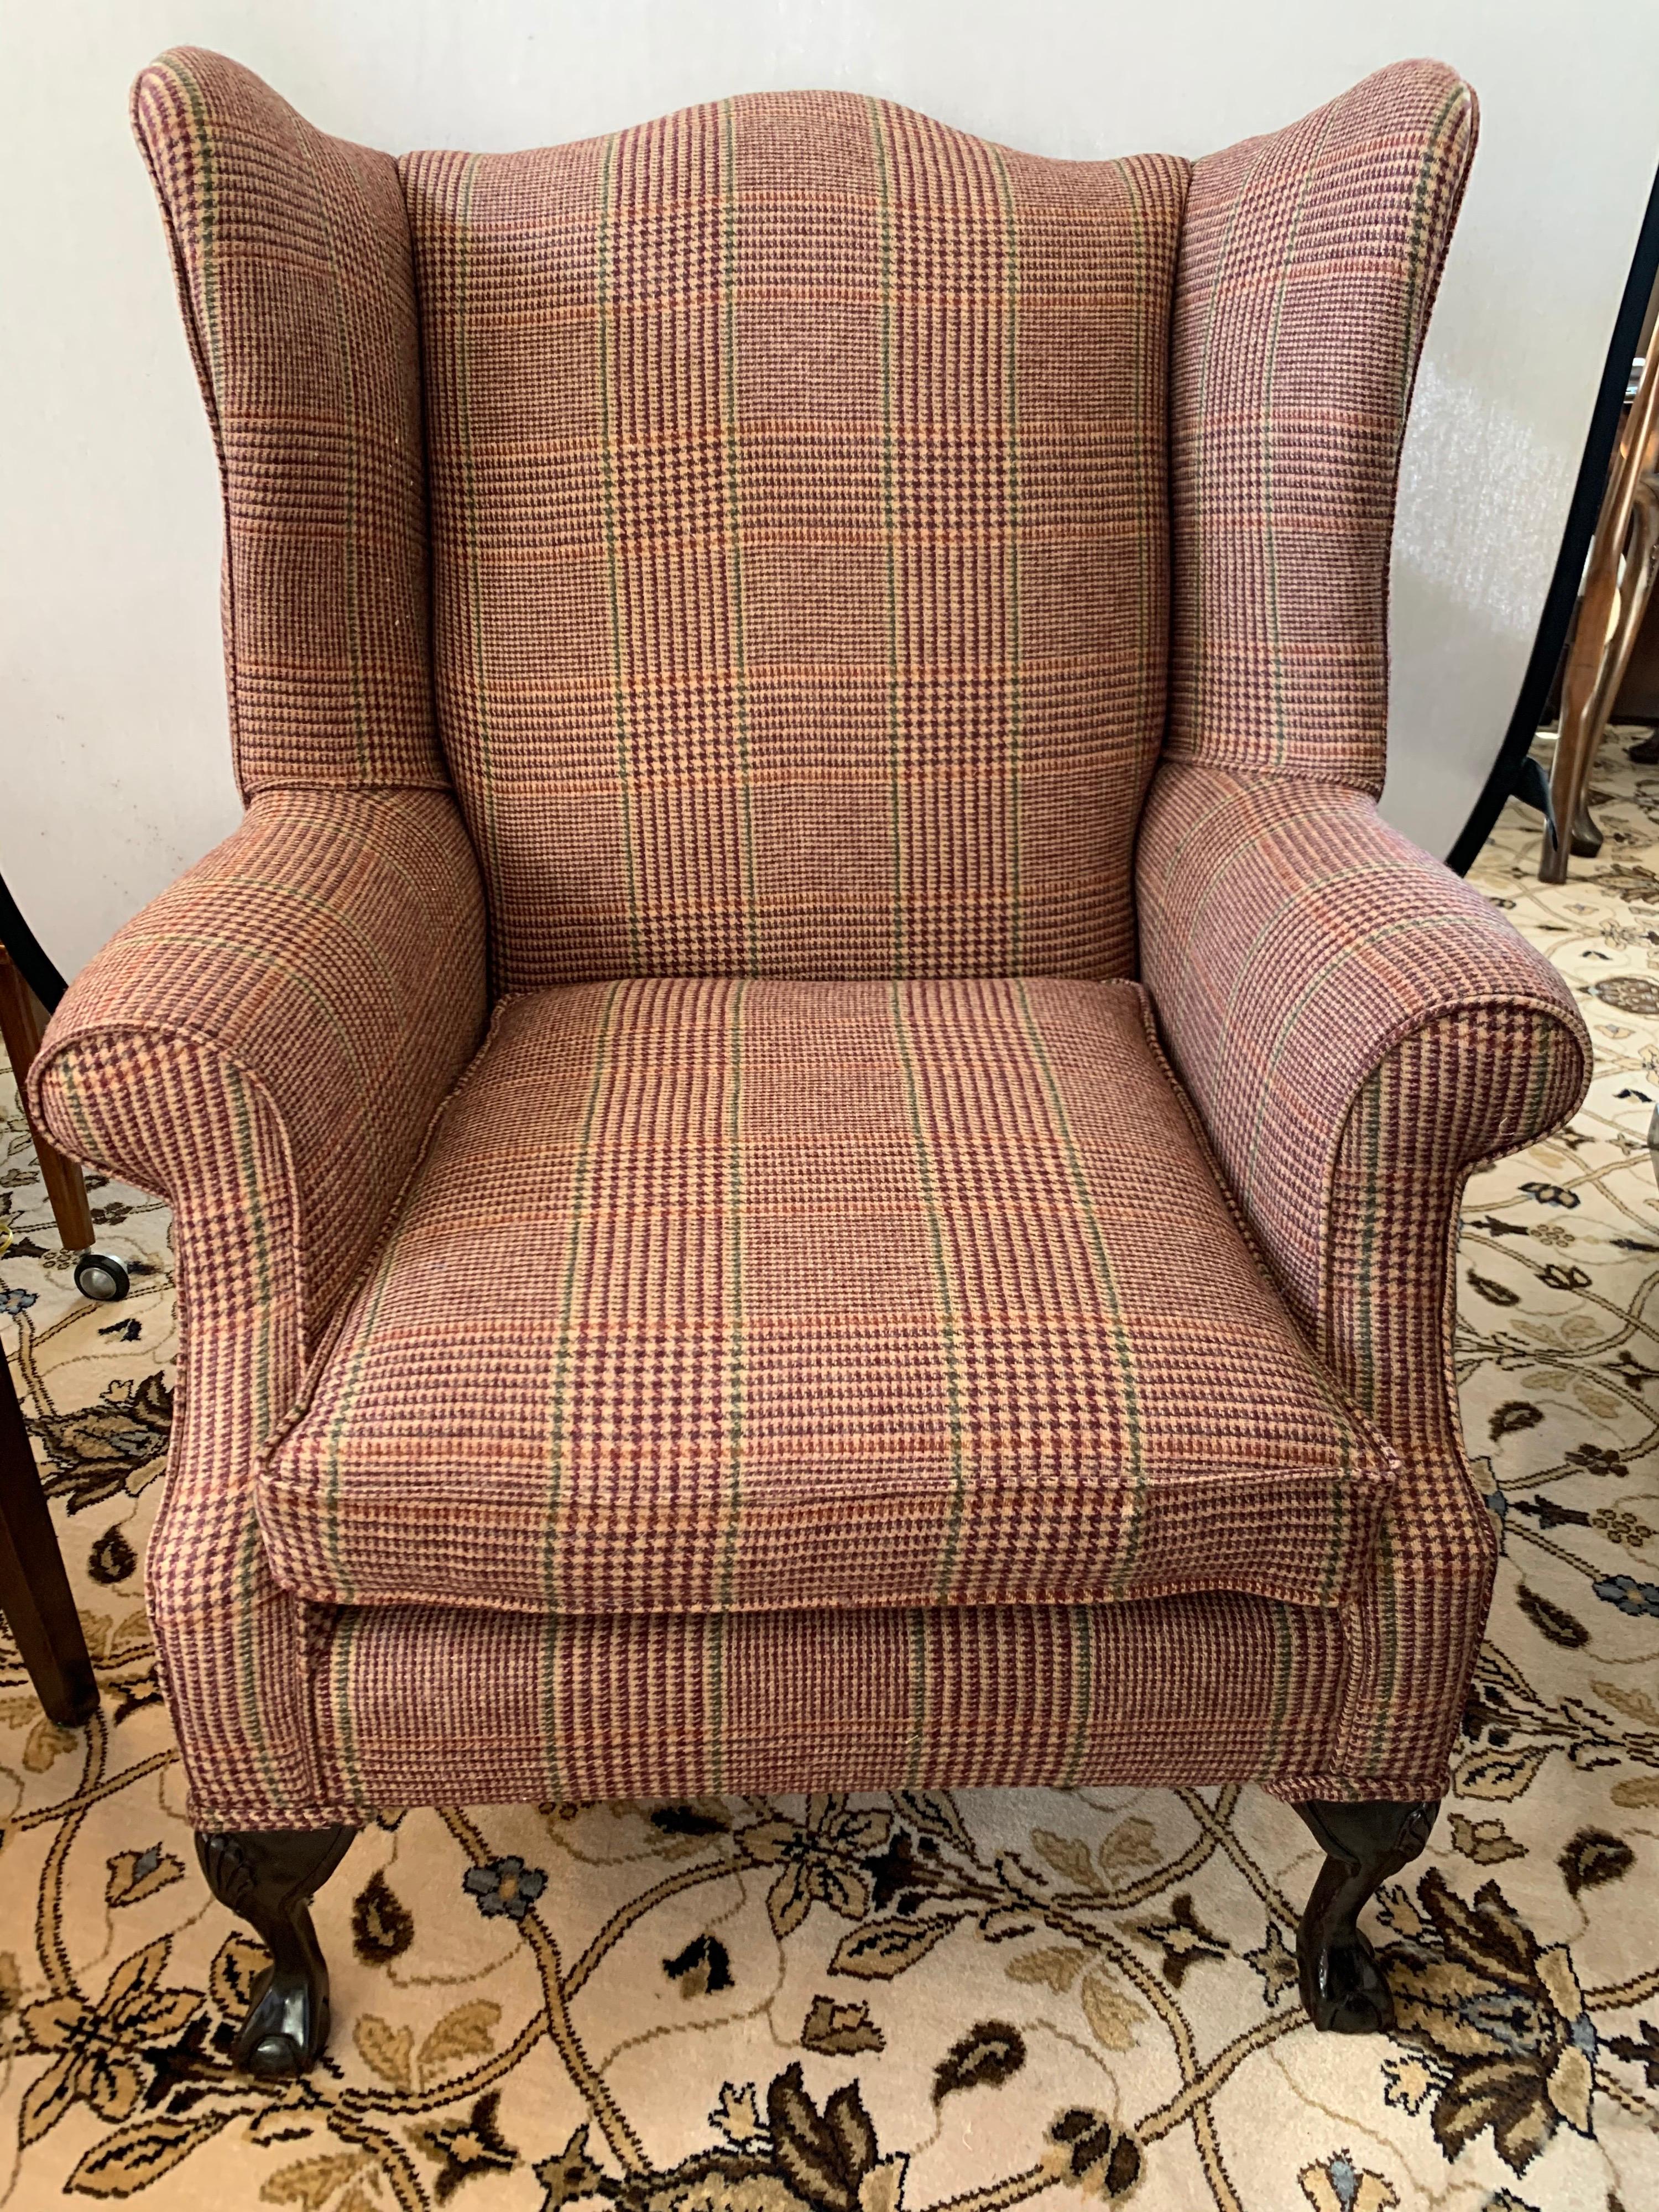 Magnificent Georgian antique wingback chair that has been newly reupholstered in the Ralph Lauren tartan wool plaid fabric. The tartan plaid fabric melds perfectly with the dark, rich mahogany ball and claw legs. One of three special chairs we are